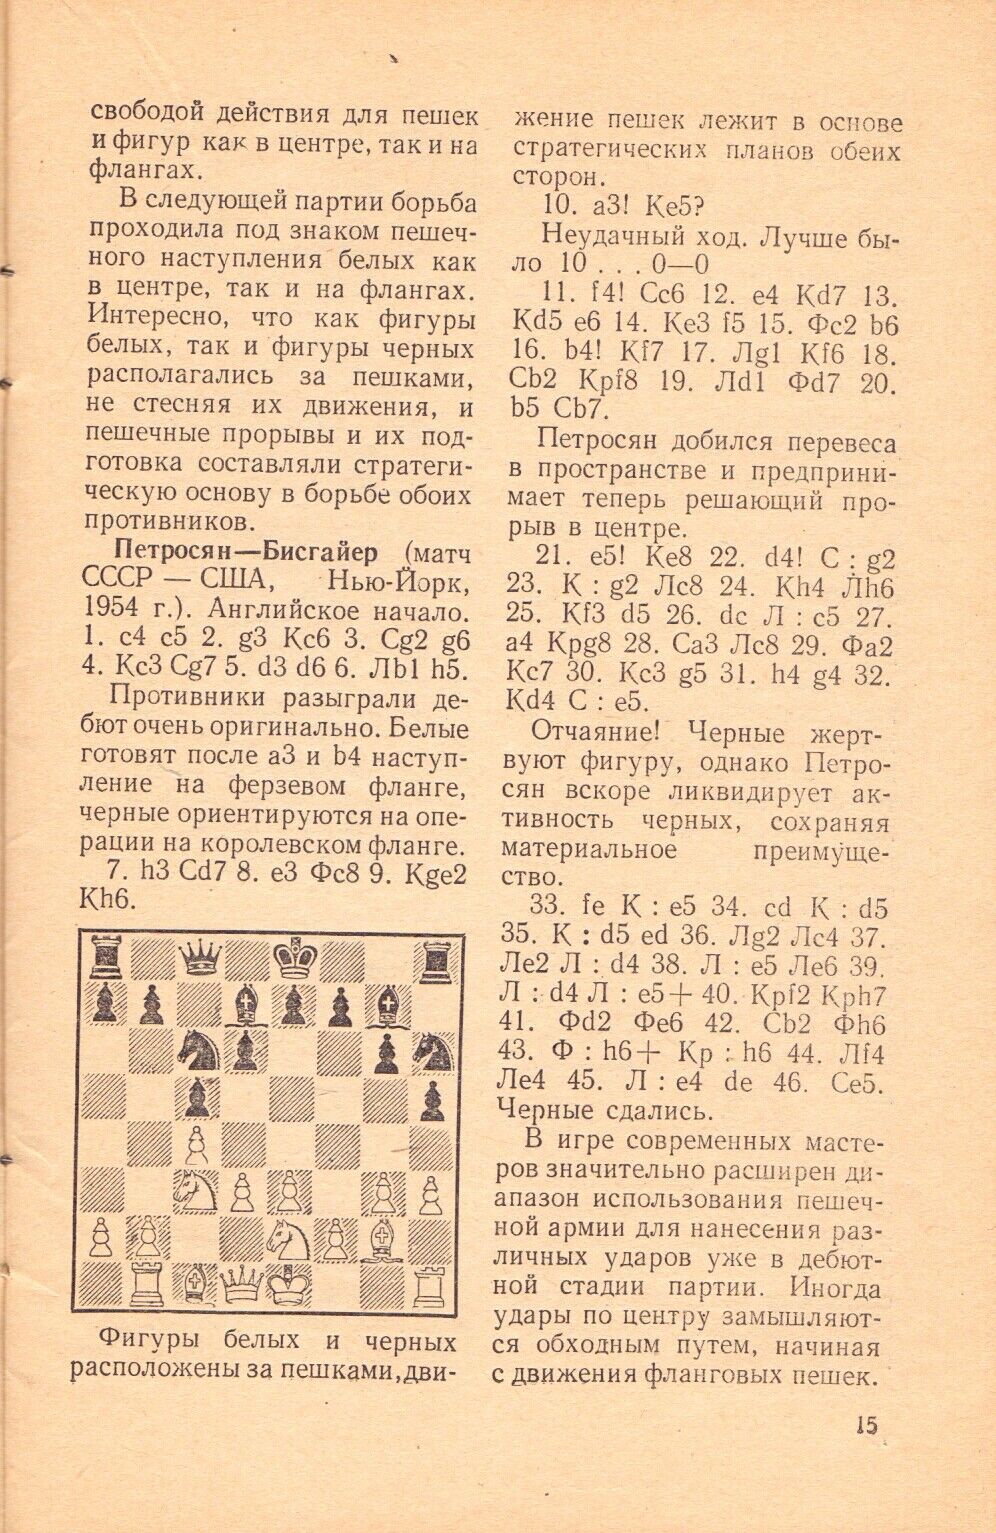 11037.Chess Book. Signed by A. Sokolsky to Ya. Rokhlin. Pawns in Motion. Moscow. 1962